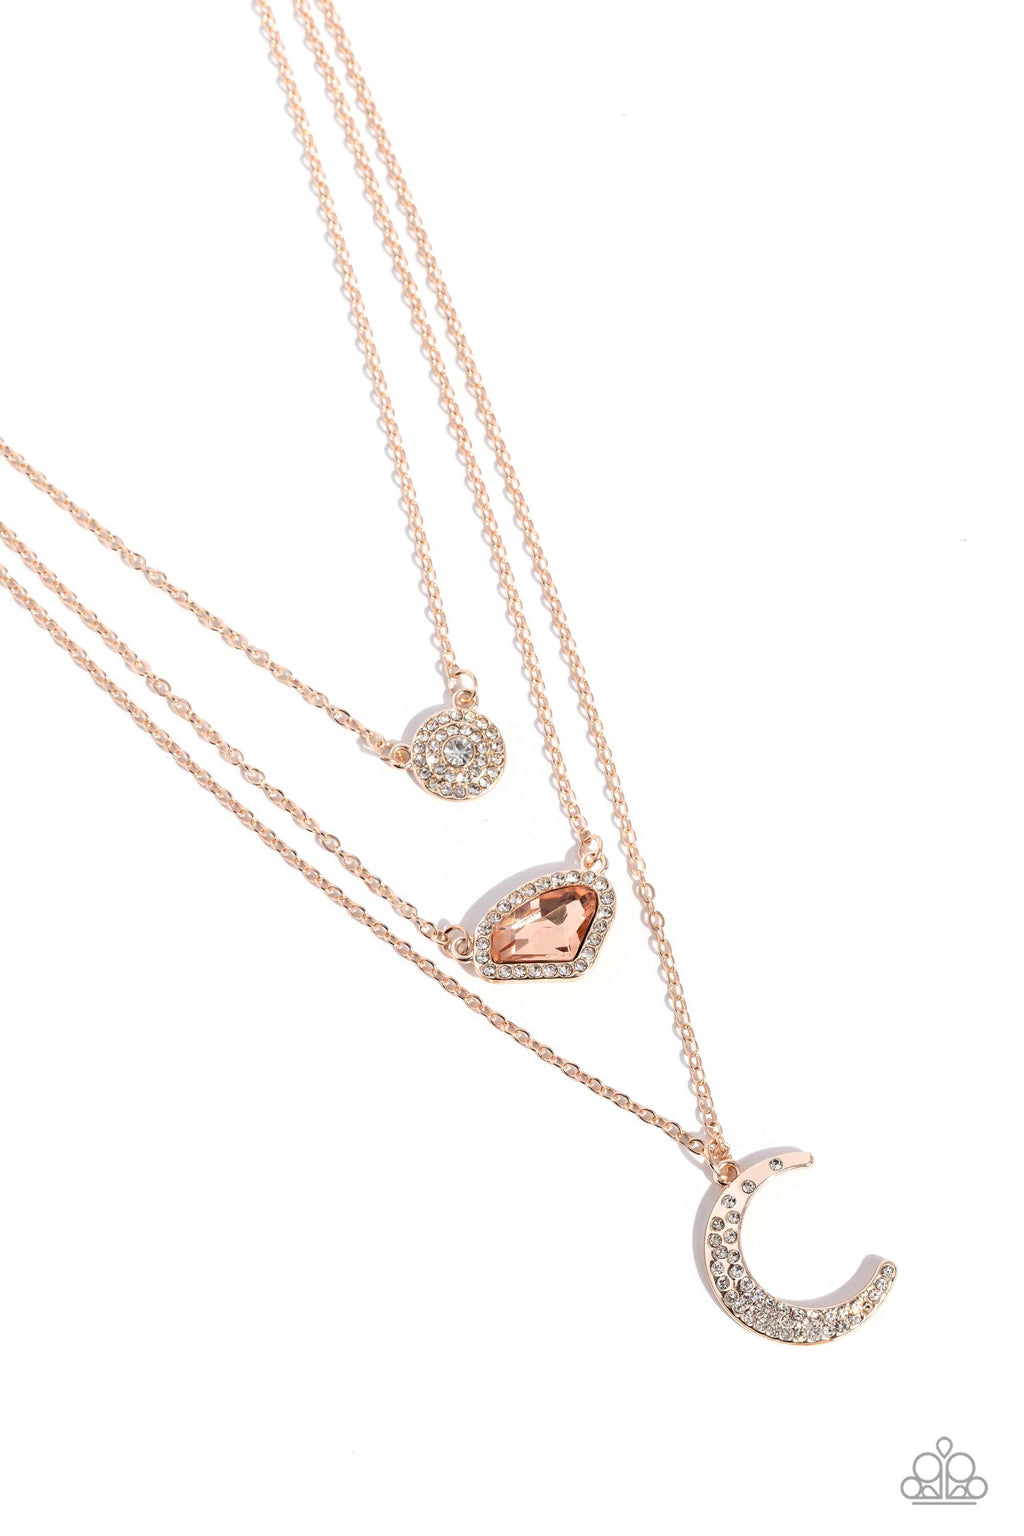 five-dollar-jewelry-lunar-lineup-rose-gold-paparazzi-accessories